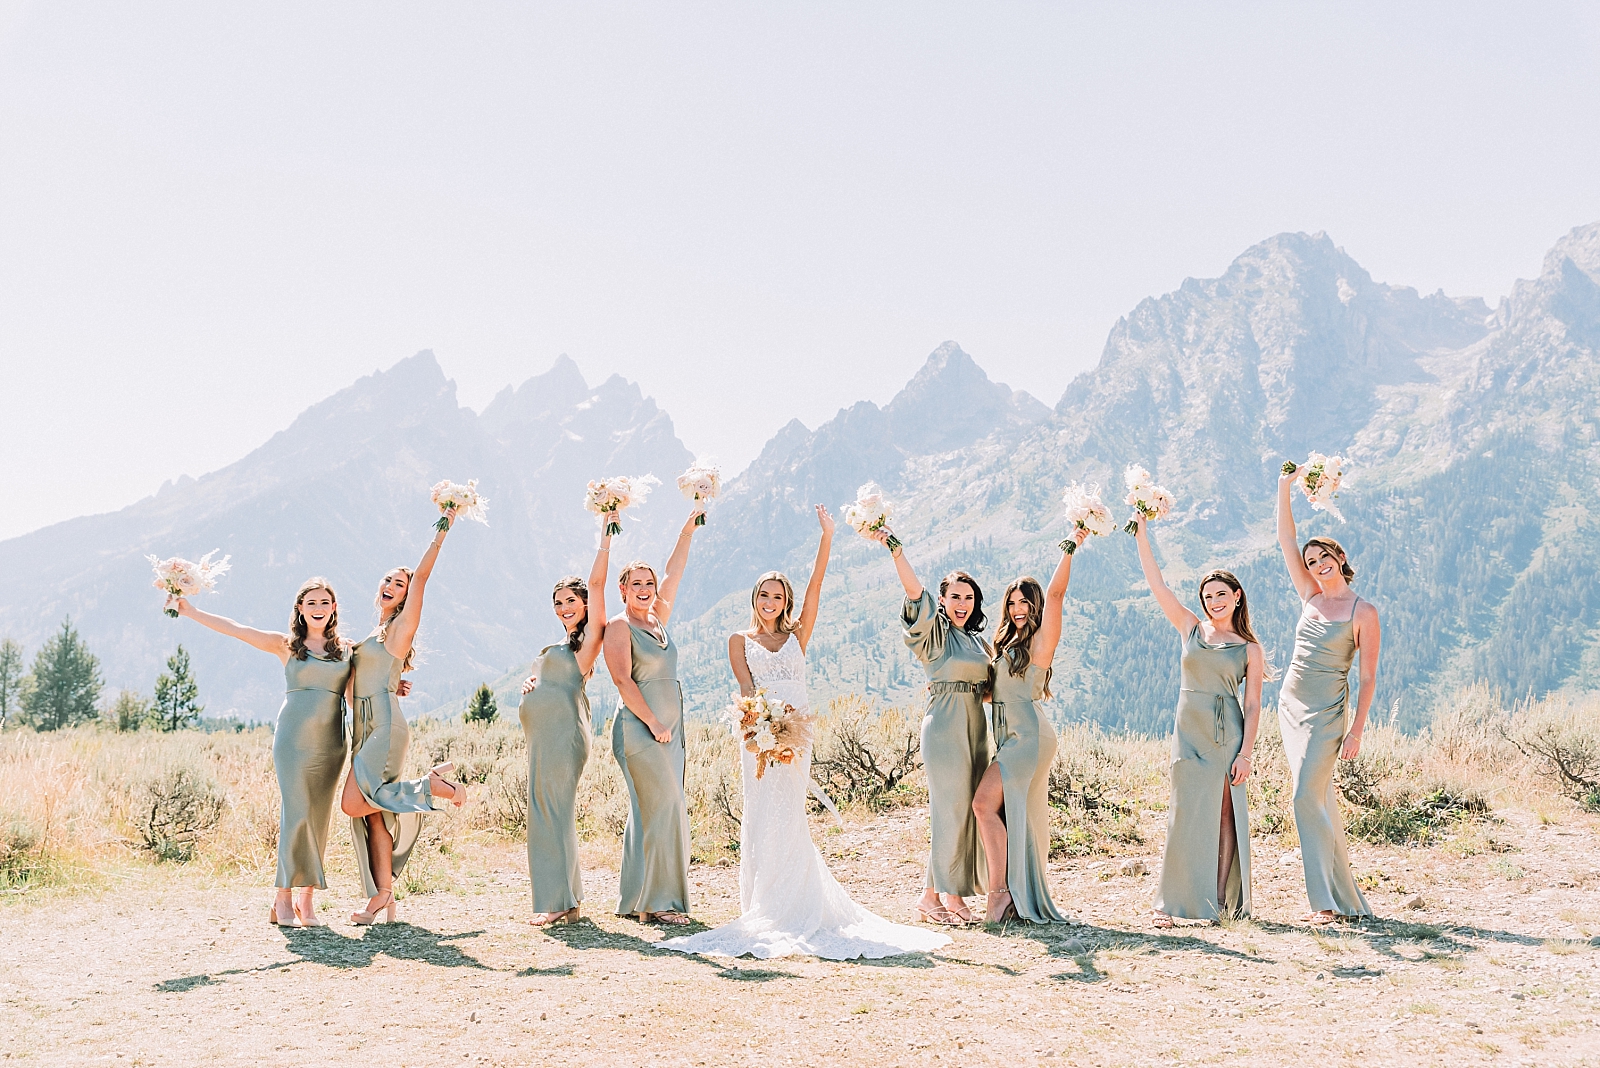 10 bridesmaid poses to include on your wedding day